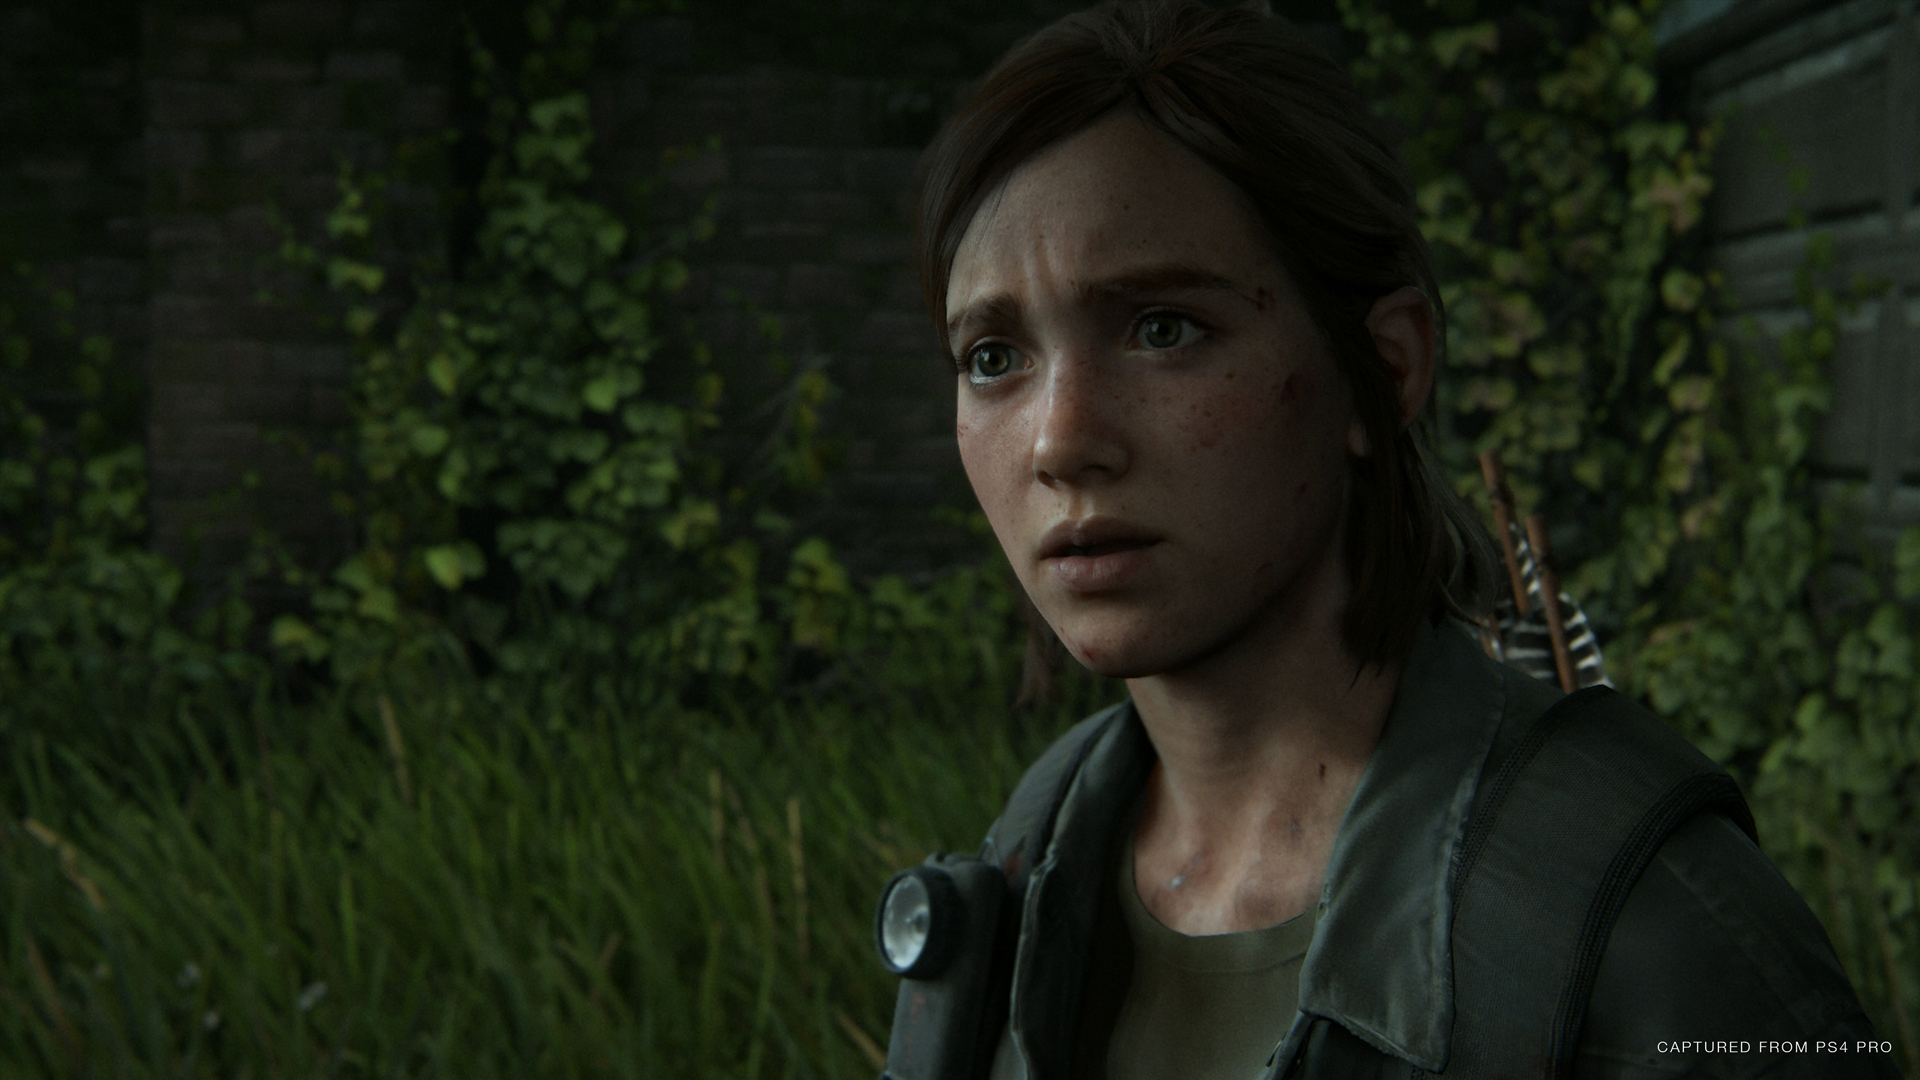 The Last of Us 2: Remastered seemingly confirmed by Naughty Dog